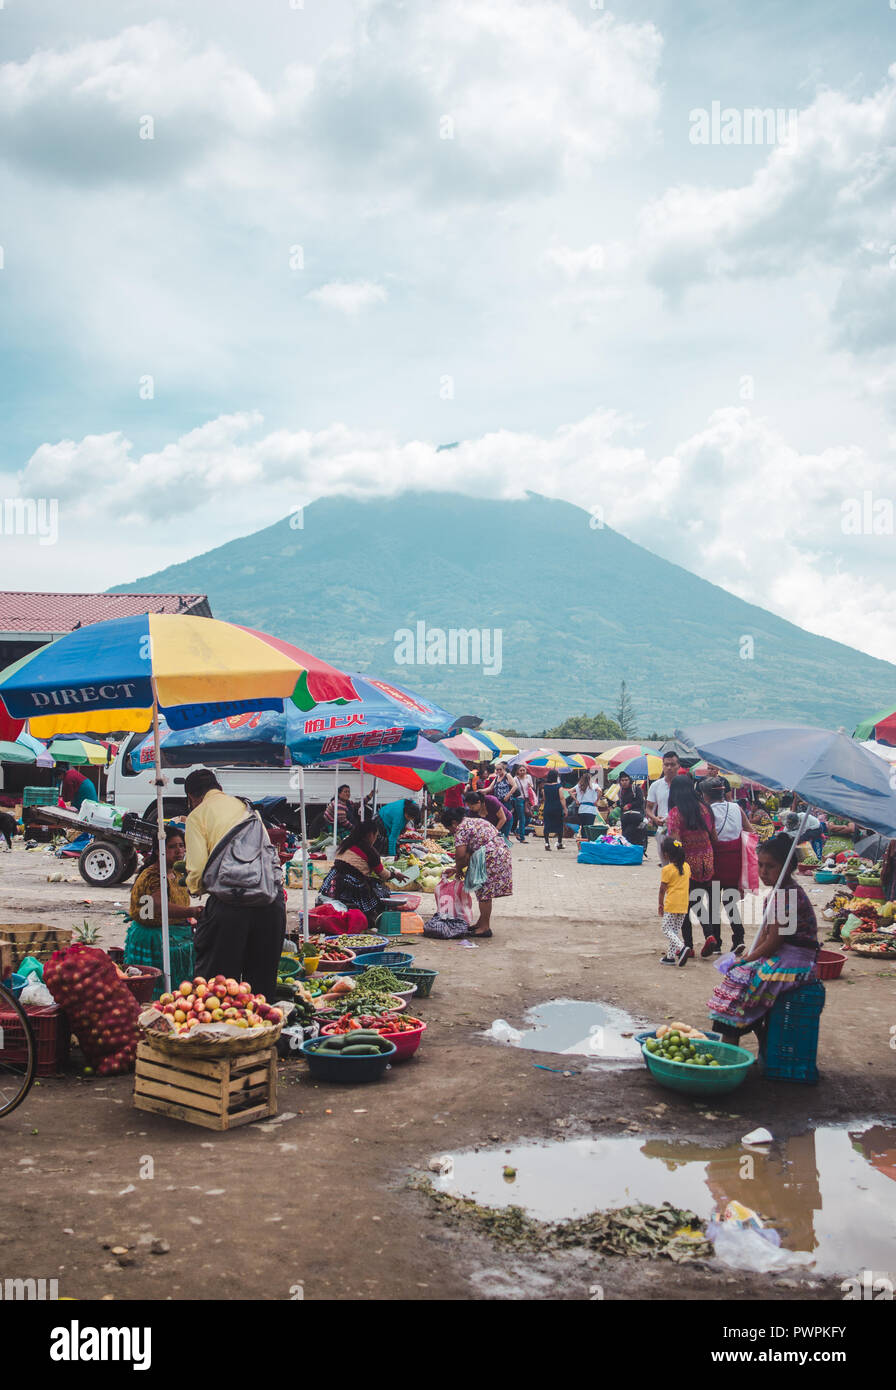 Women and girls in traditional mayan dress sell fruits under umbrellas outside a market in Antigua, Guatemala under the shadow of a volcano Stock Photo